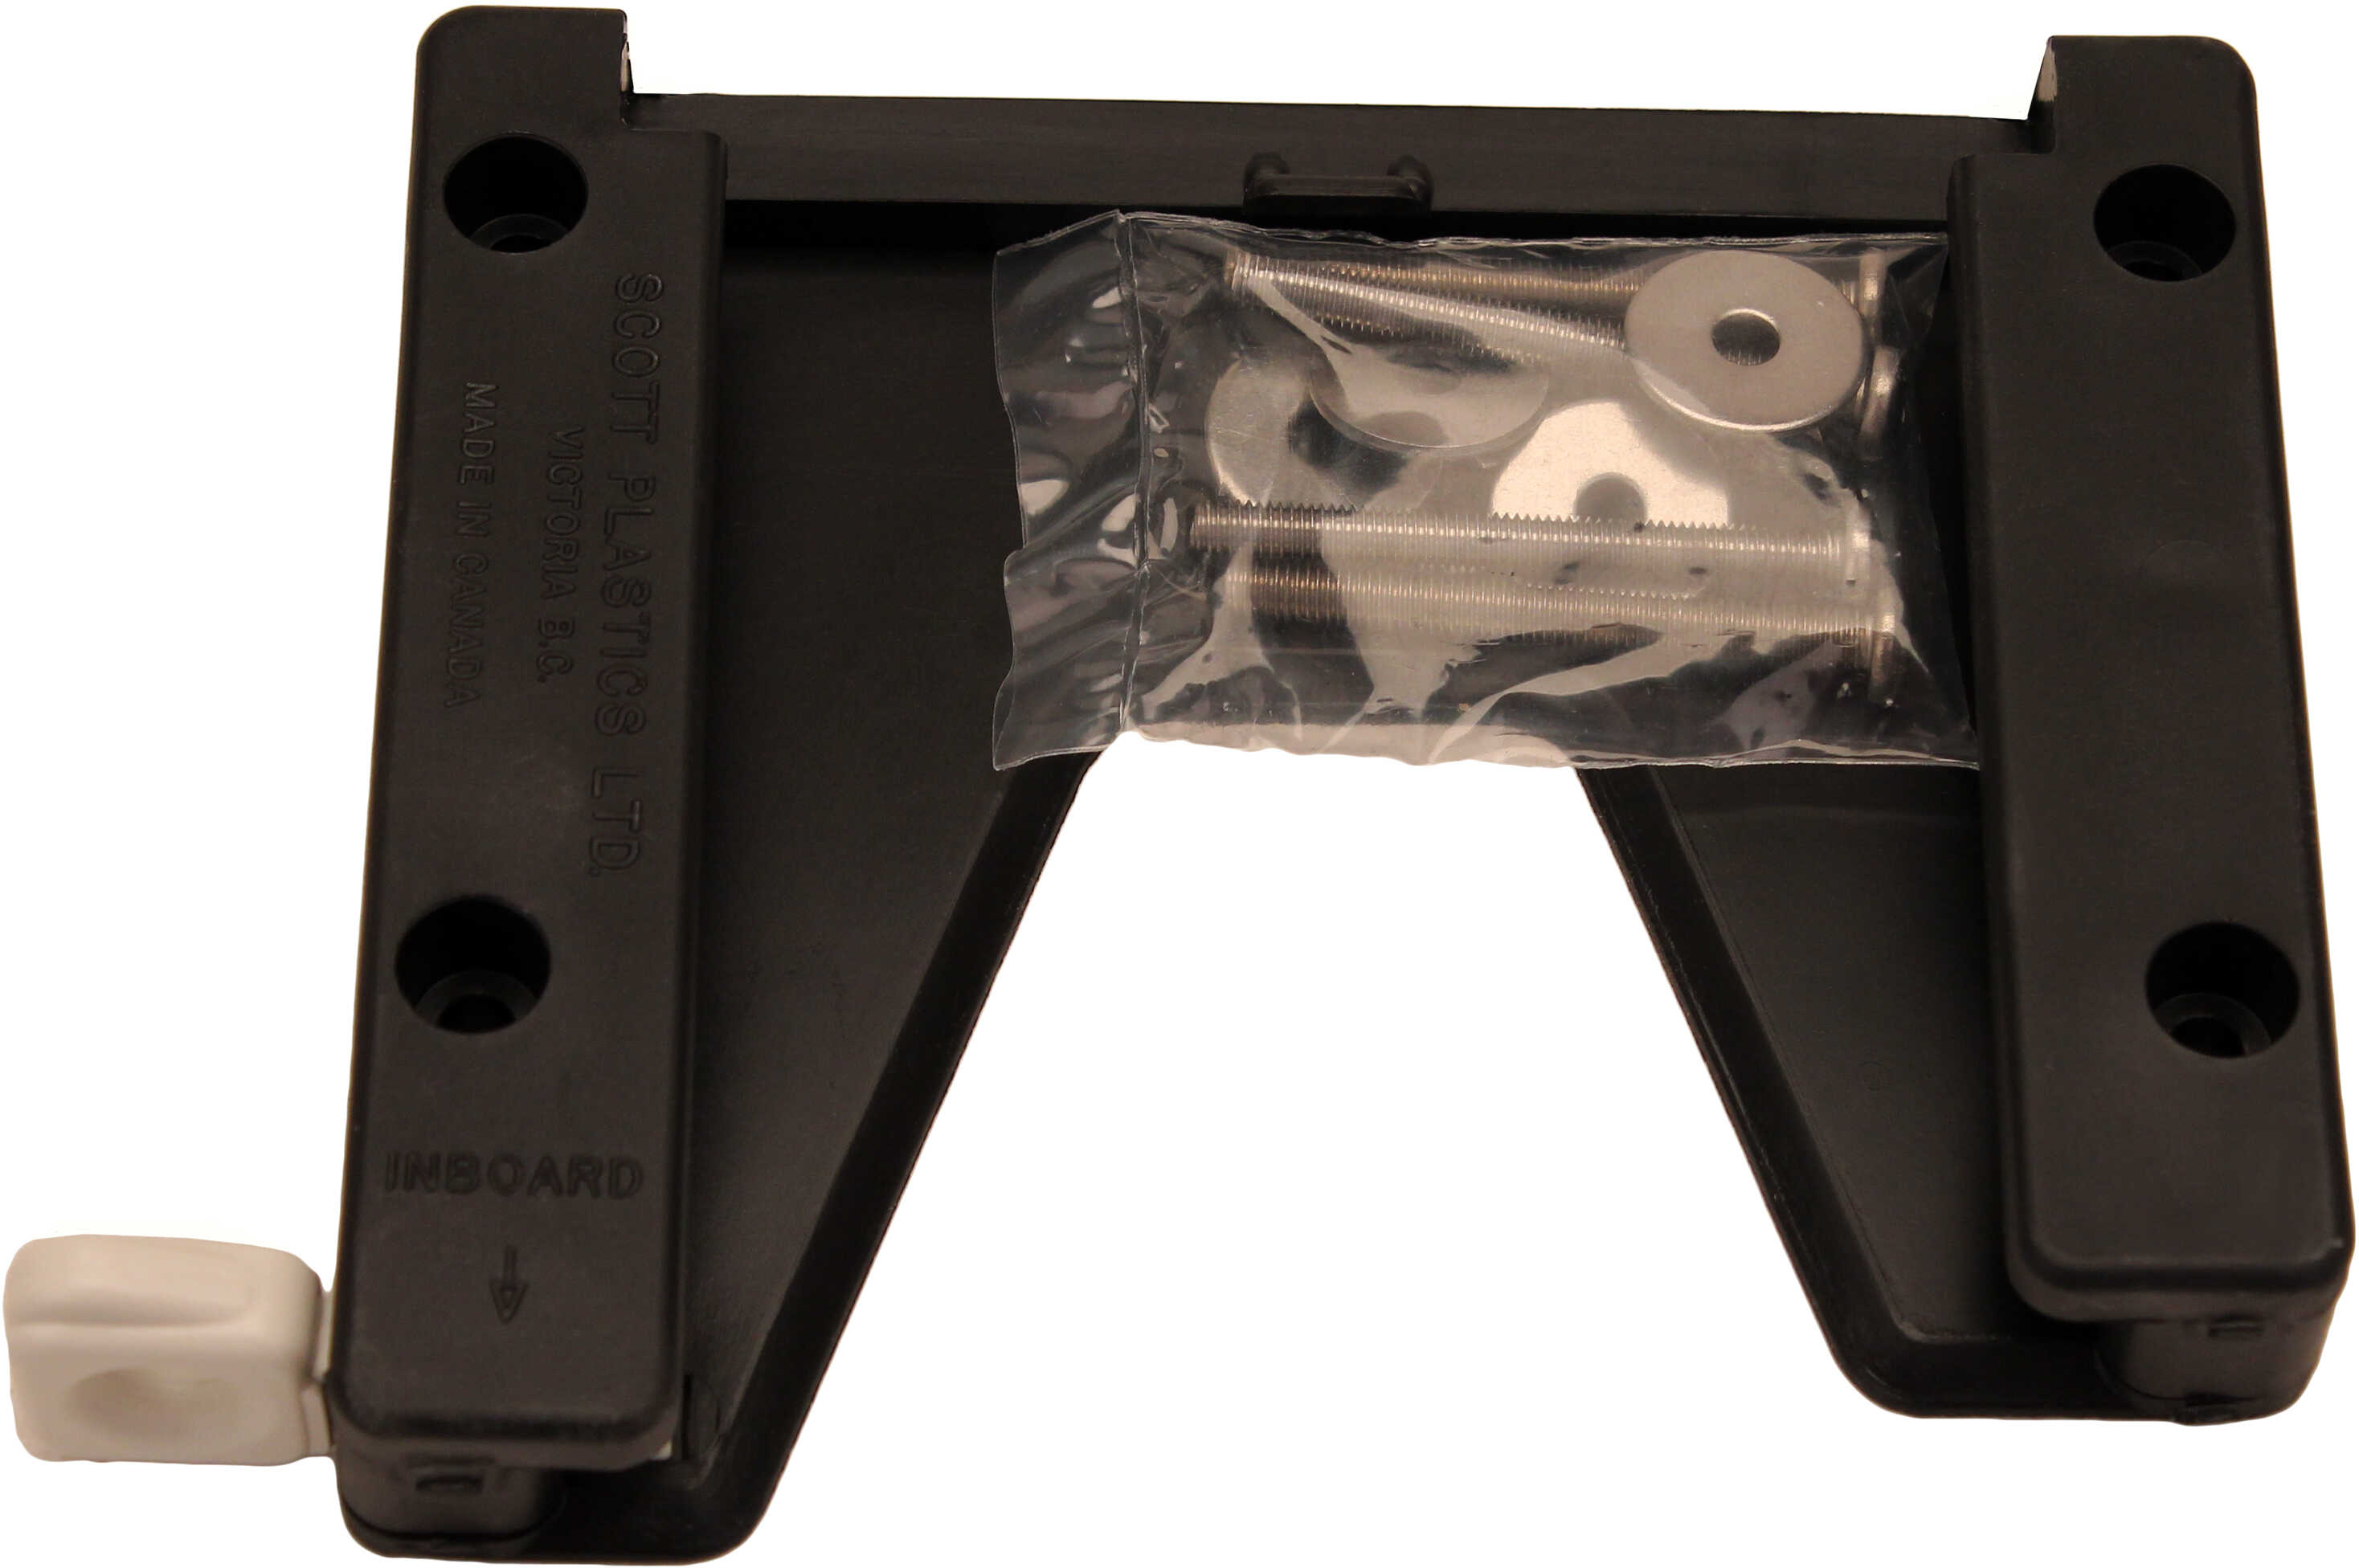 Scotty Mounting Bracket for Model 1050 & 1060 DR Md: 1010